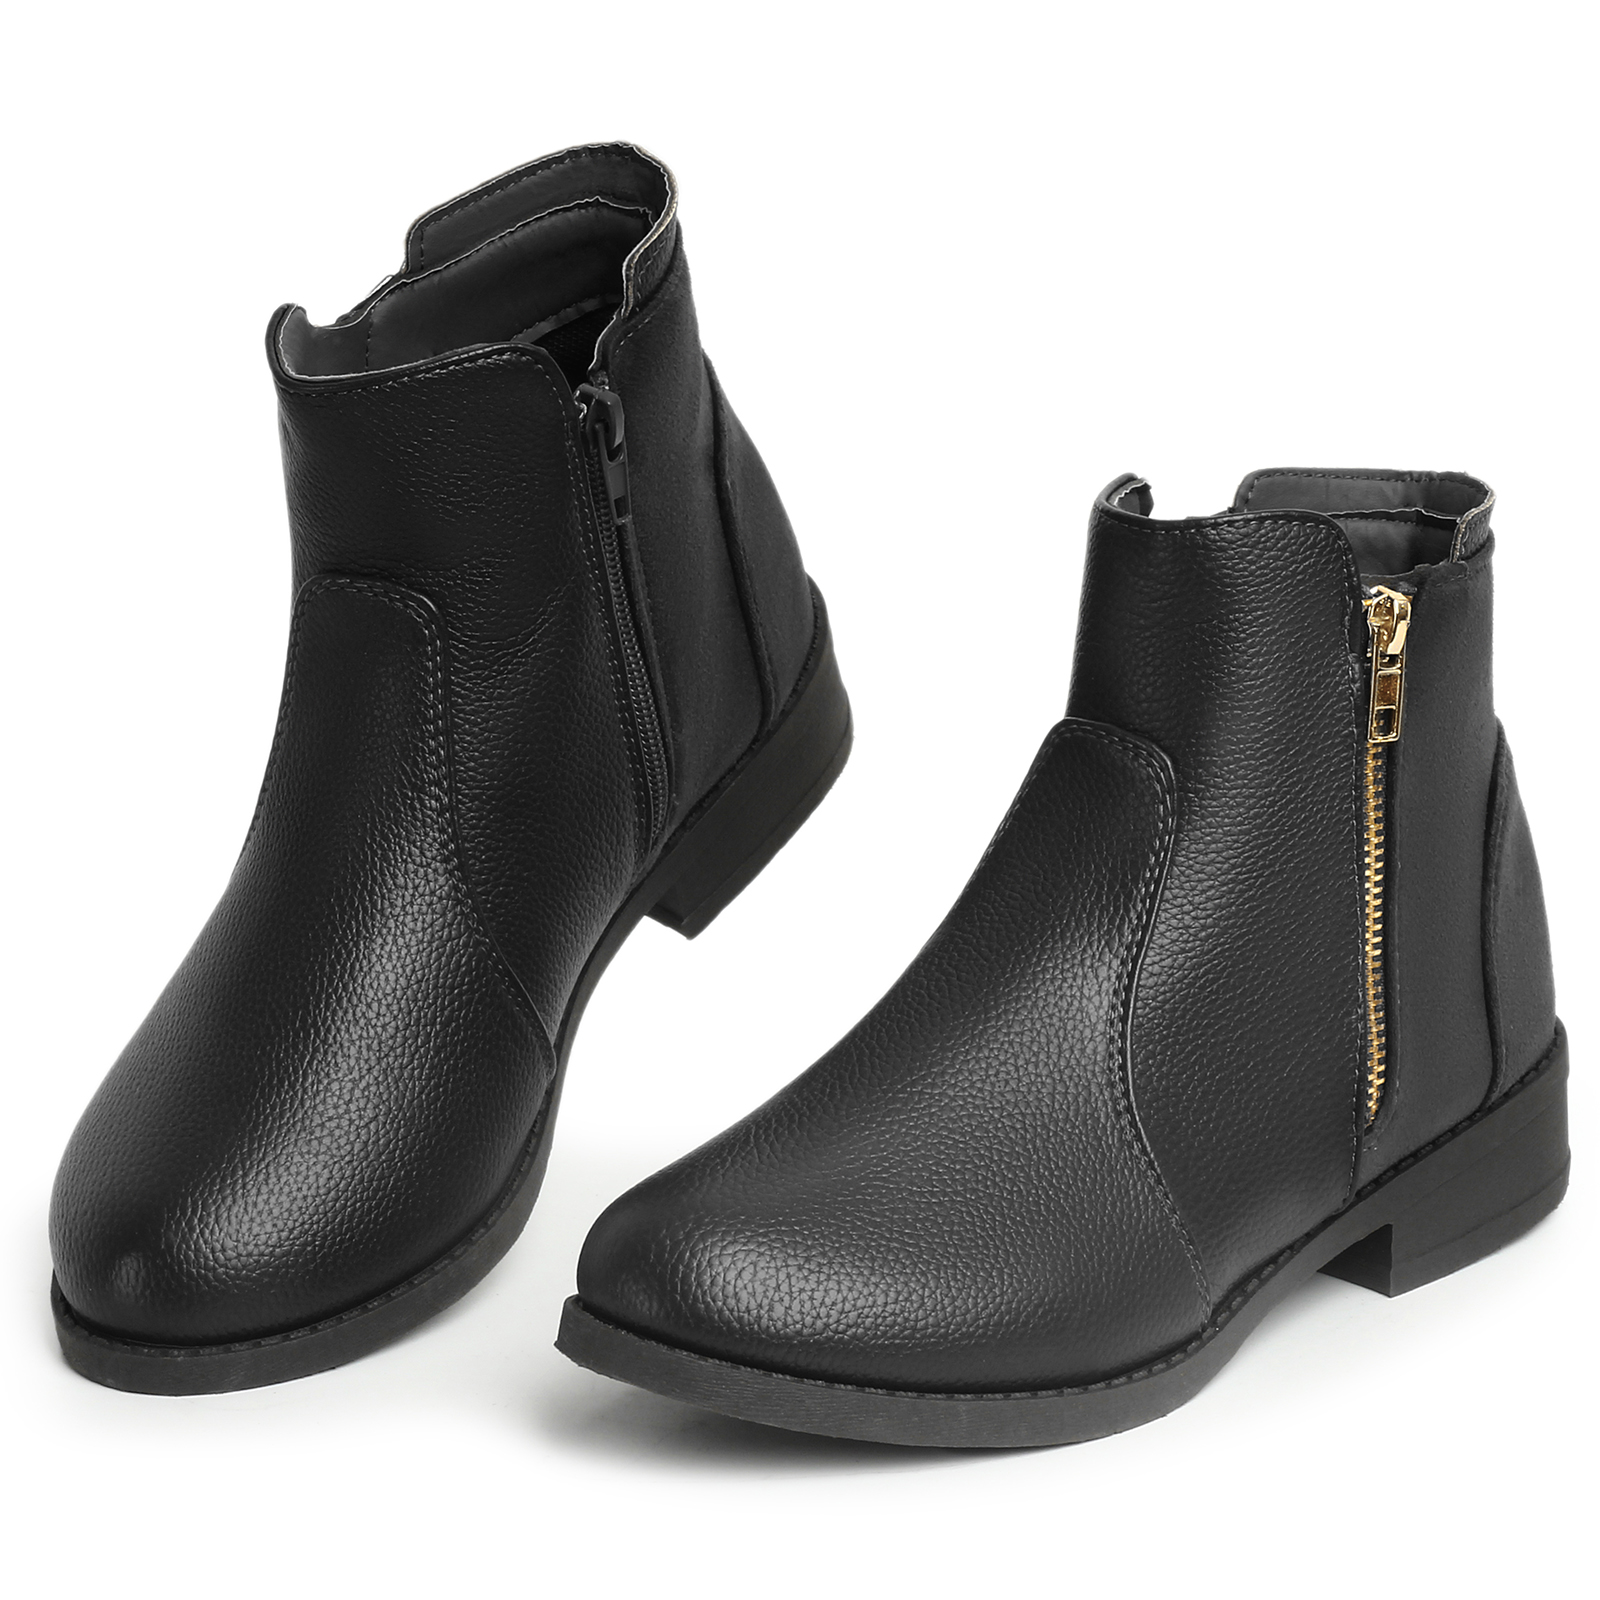 MUSSHOE Ankle Boots with Side Zipper